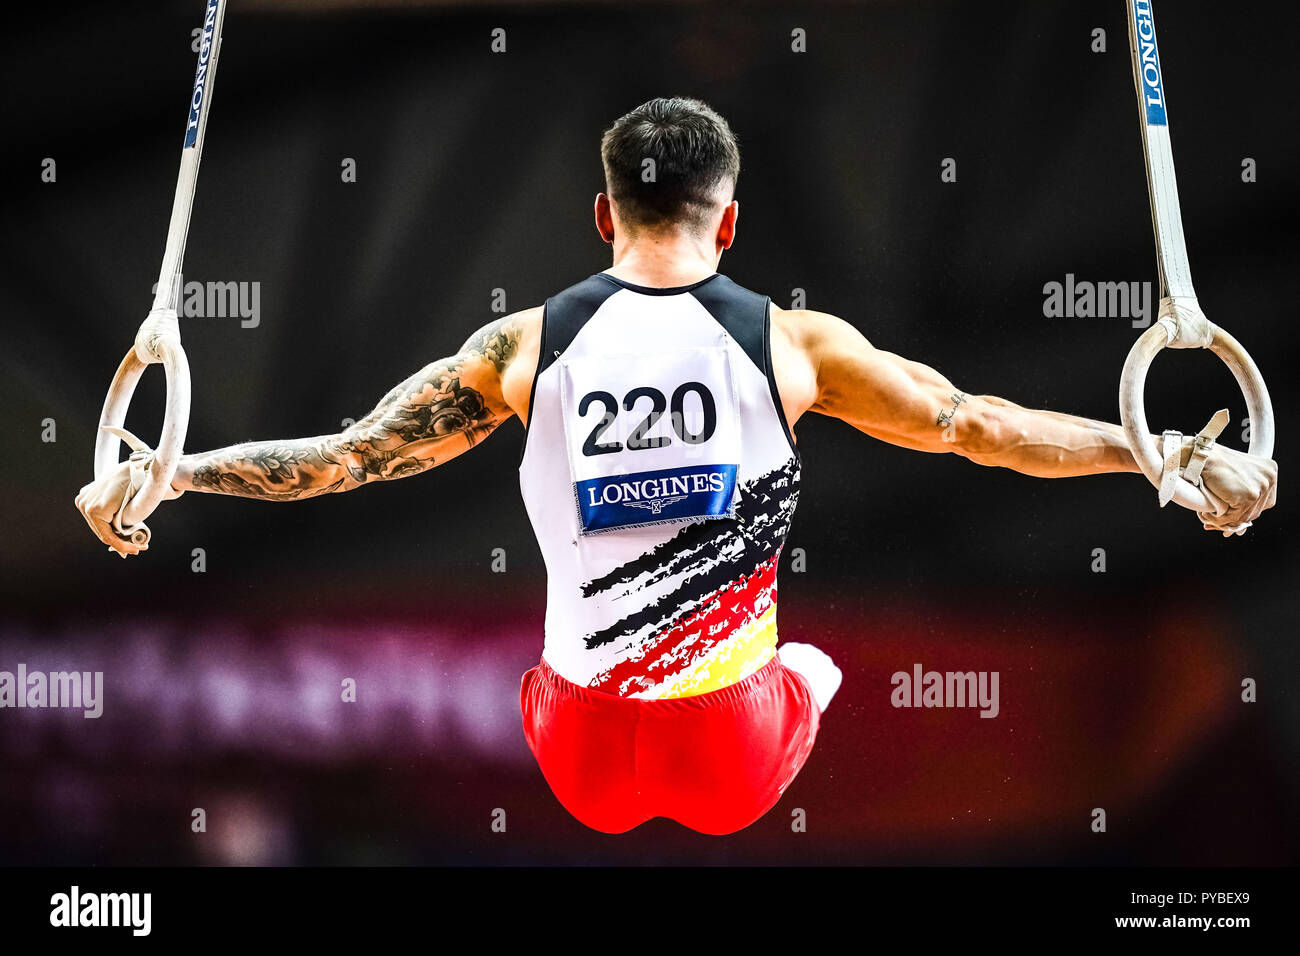 Doha, Qatar. 26th Oct 2018. October 26, 2018: Marcel Nguyen of Germany during Rings qualification at the Aspire Dome in Doha, Qatar, Artistic FIG Gymnastics World Championships. Ulrik Pedersen/CSM Credit: Cal Sport Media/Alamy Live News Stock Photo